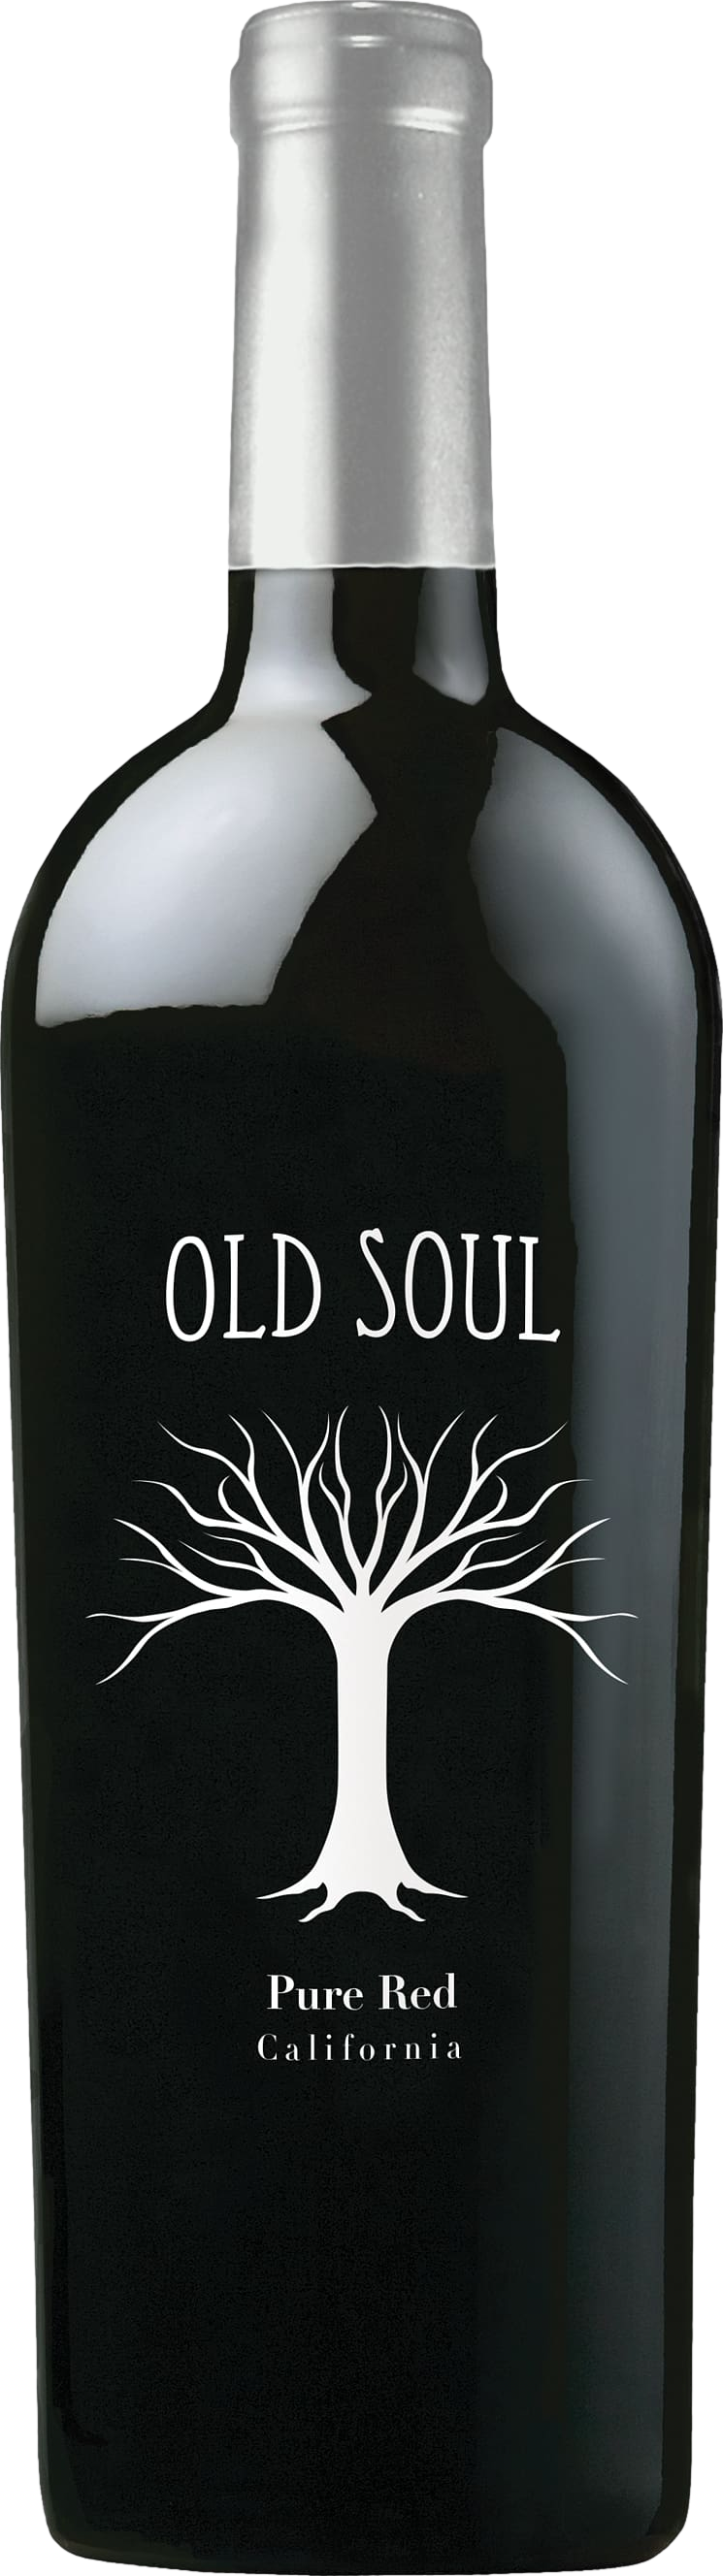 2014/2020 günstig Kaufen-Old Soul Pure Red 2020. Old Soul Pure Red 2020 . 